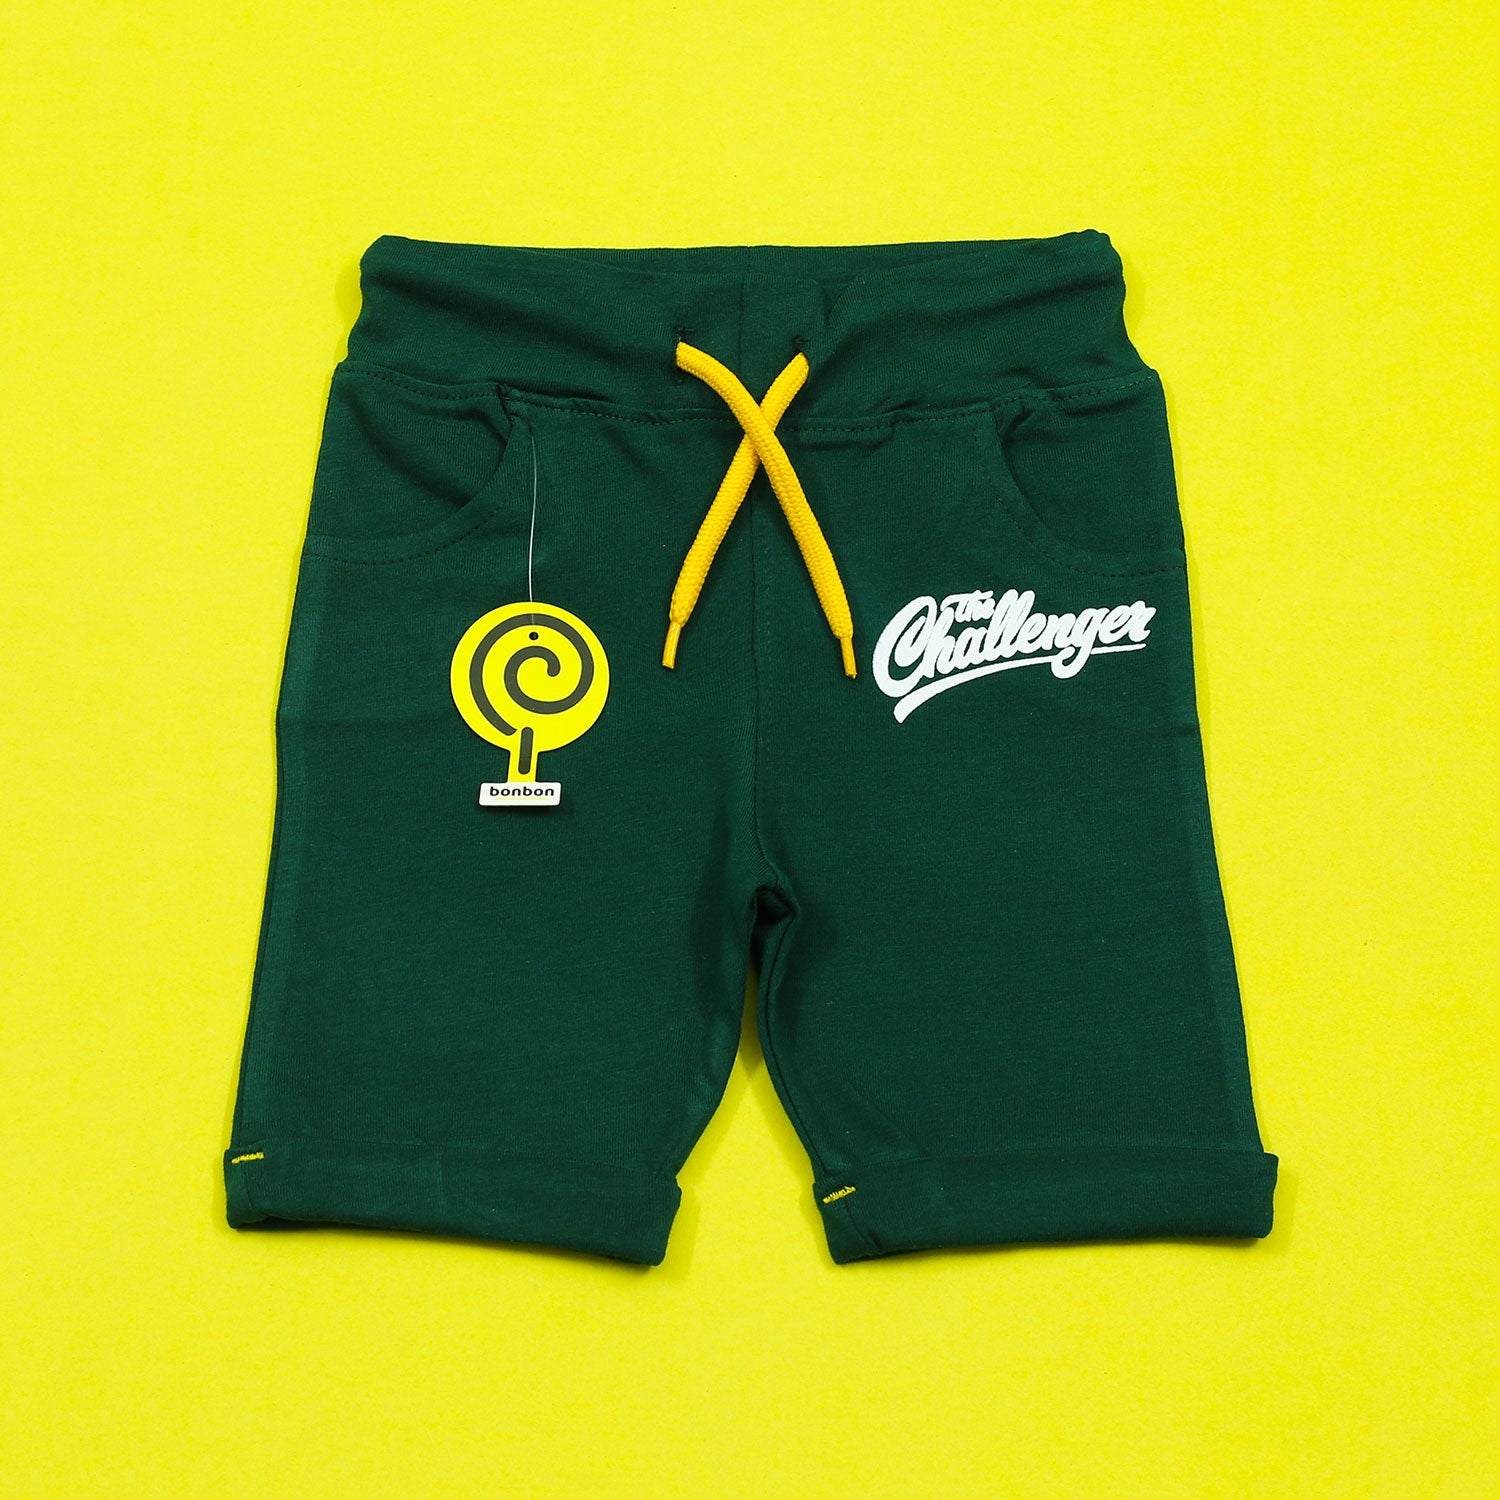 The Challenger Green Shorts